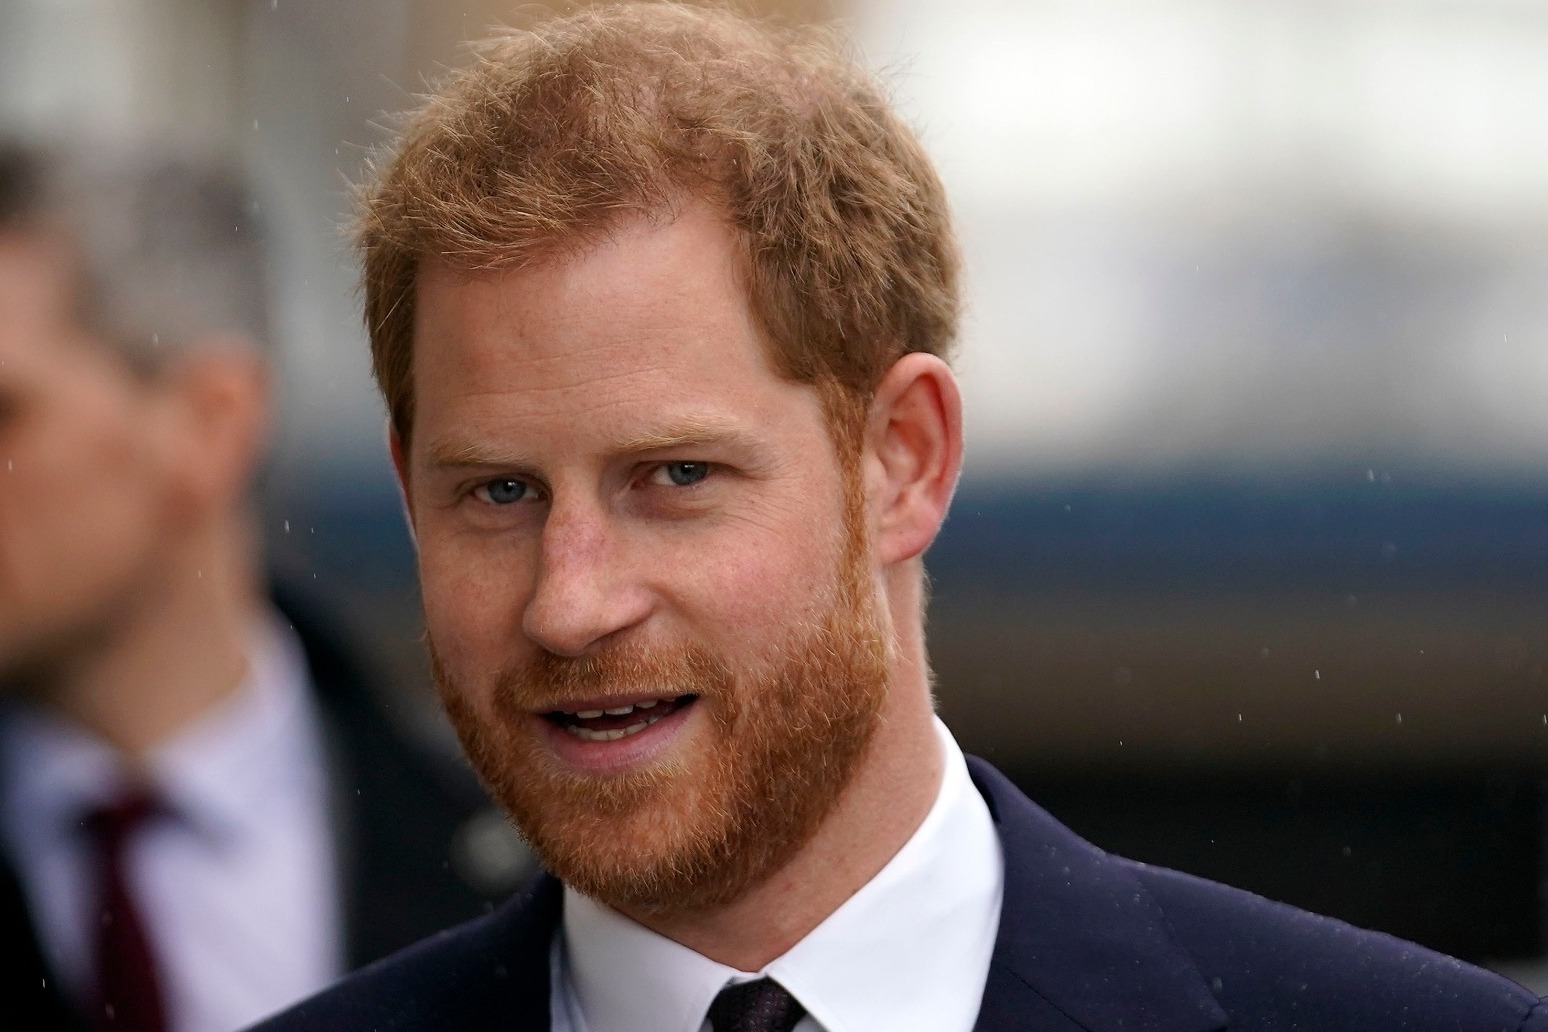 Duke of Sussex says he and Meghan Markle had no choice but to stand down 